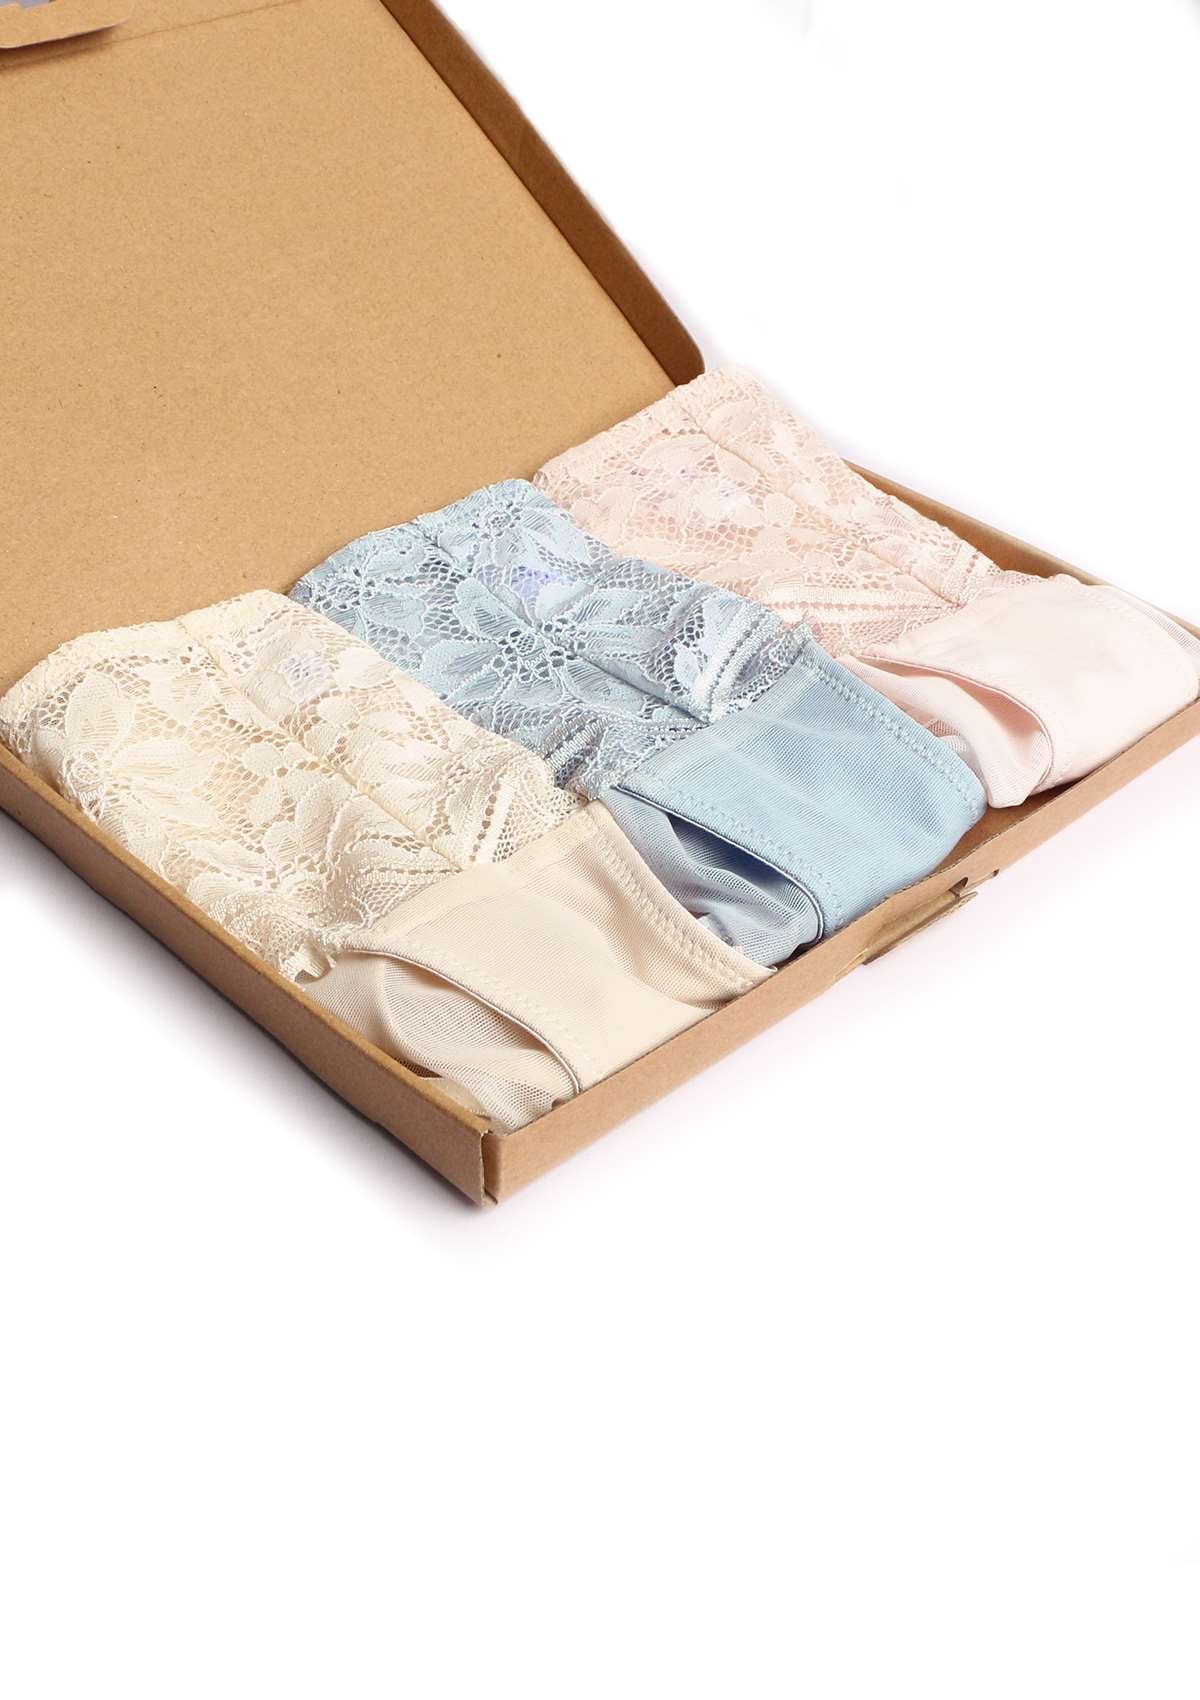 HSIA Silene Sheer Lace Mesh Hipster Underwear 3 Pack - L / Light Blue+Champagne+Light Pink